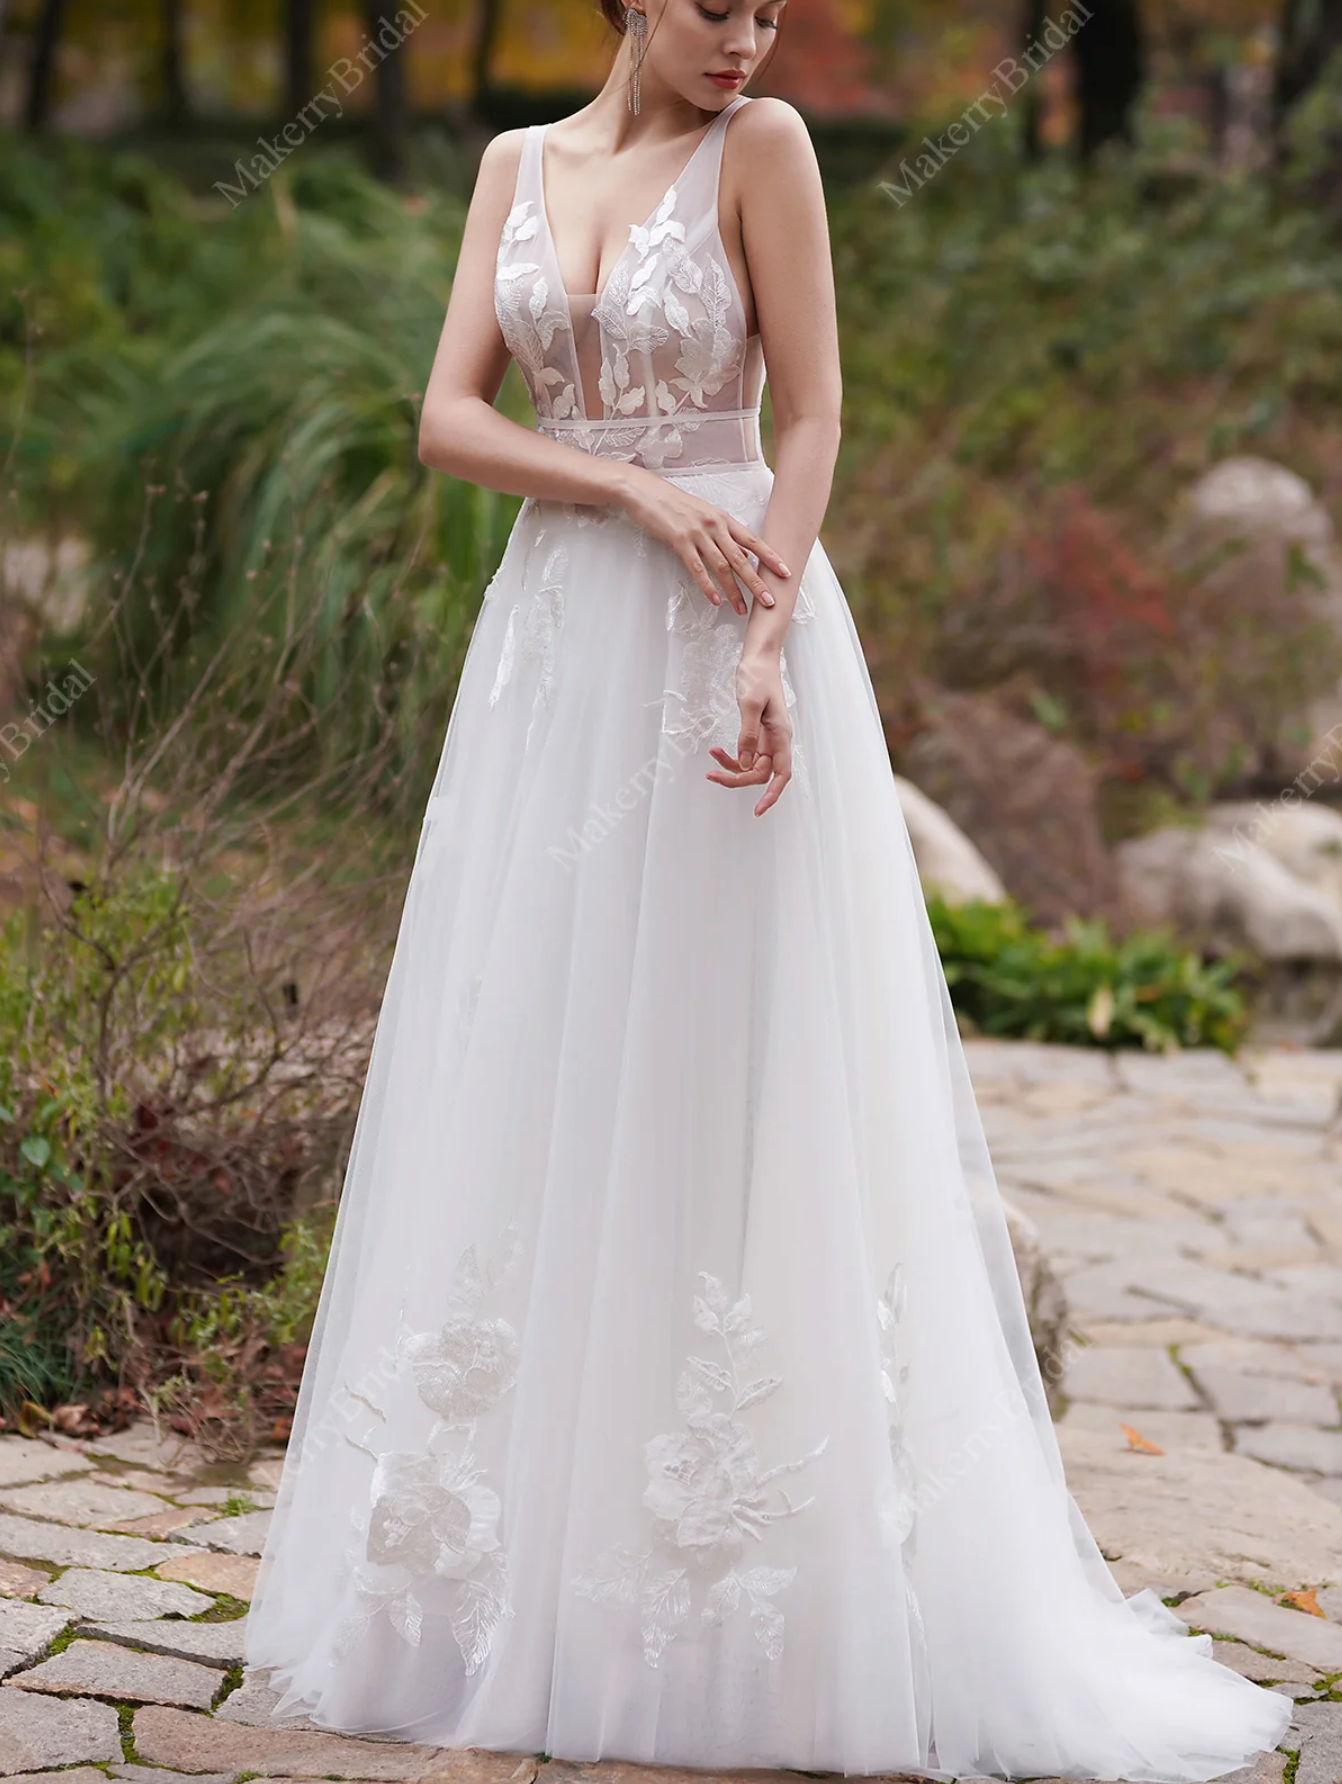 Blooming Gorgeous - Floral Bridal Wear - The Wedding Community